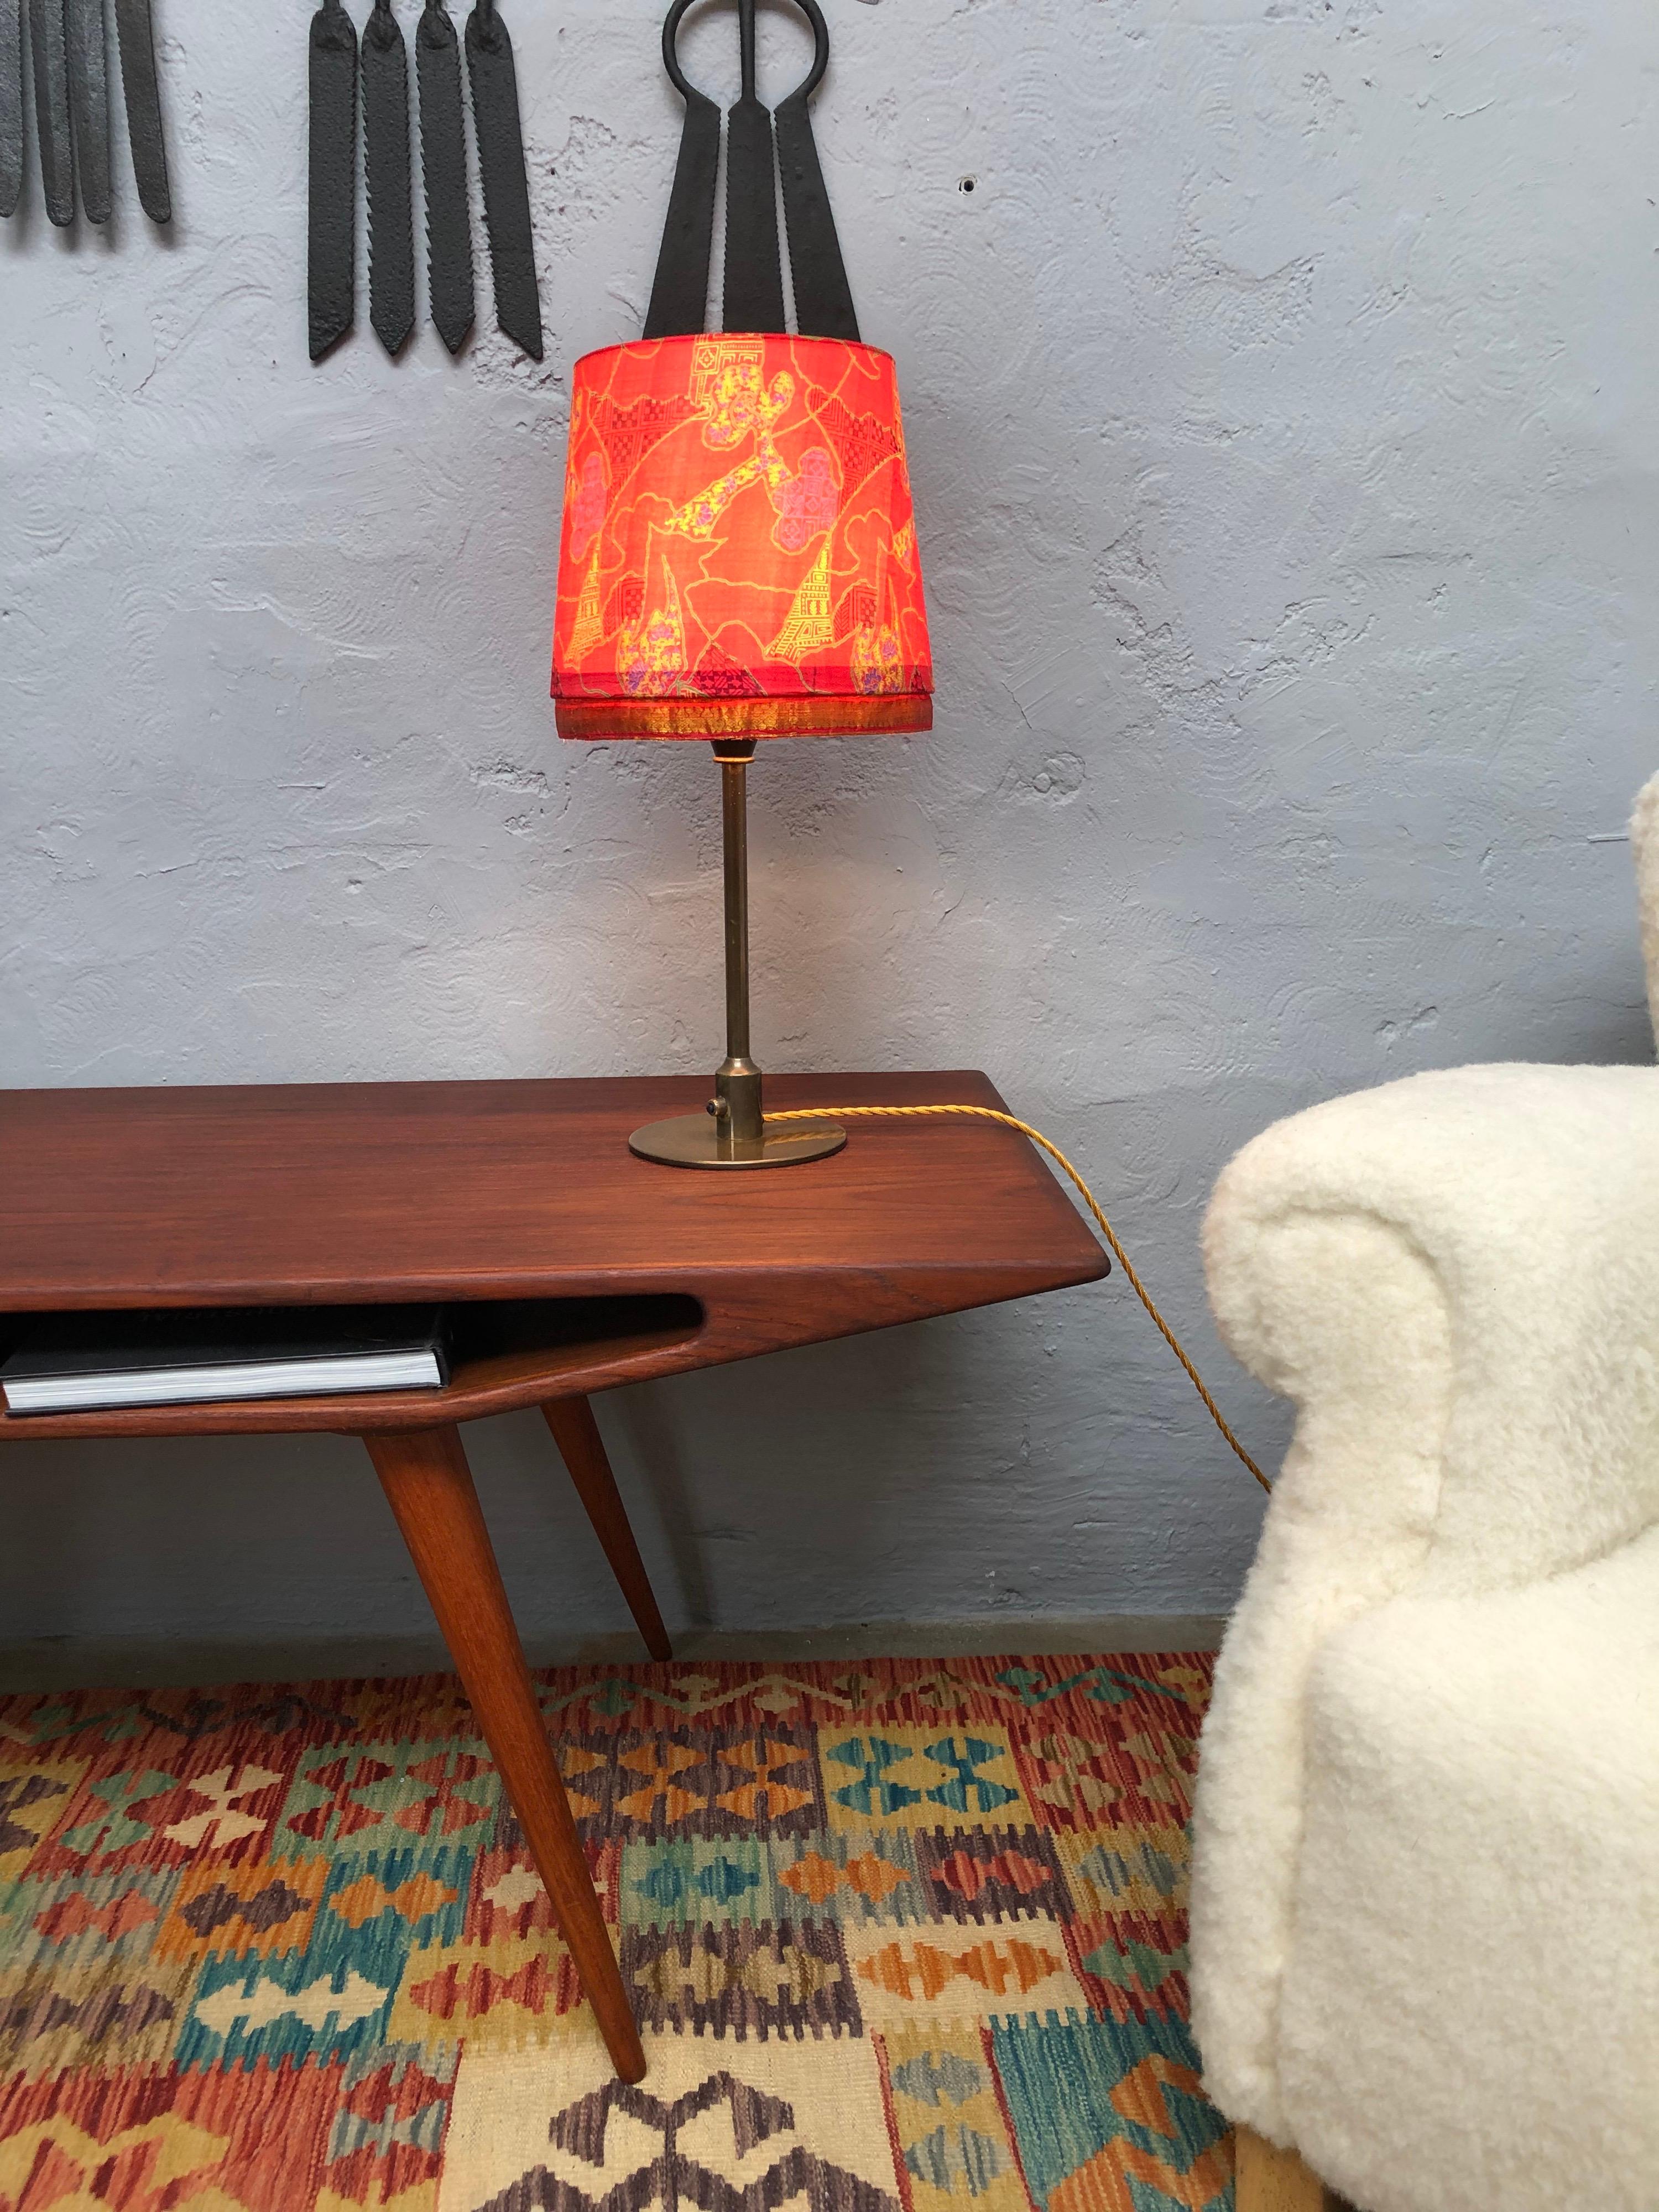 A vintage brass table lamp by Danish lighting company Fog & Mørup from the 1940s in the style of Poul Henningsen.
The lamp has been dissembled and rewired with a twisted gold cloth flex and grounded.
This Fog & Mørup table lamp has also been fitted